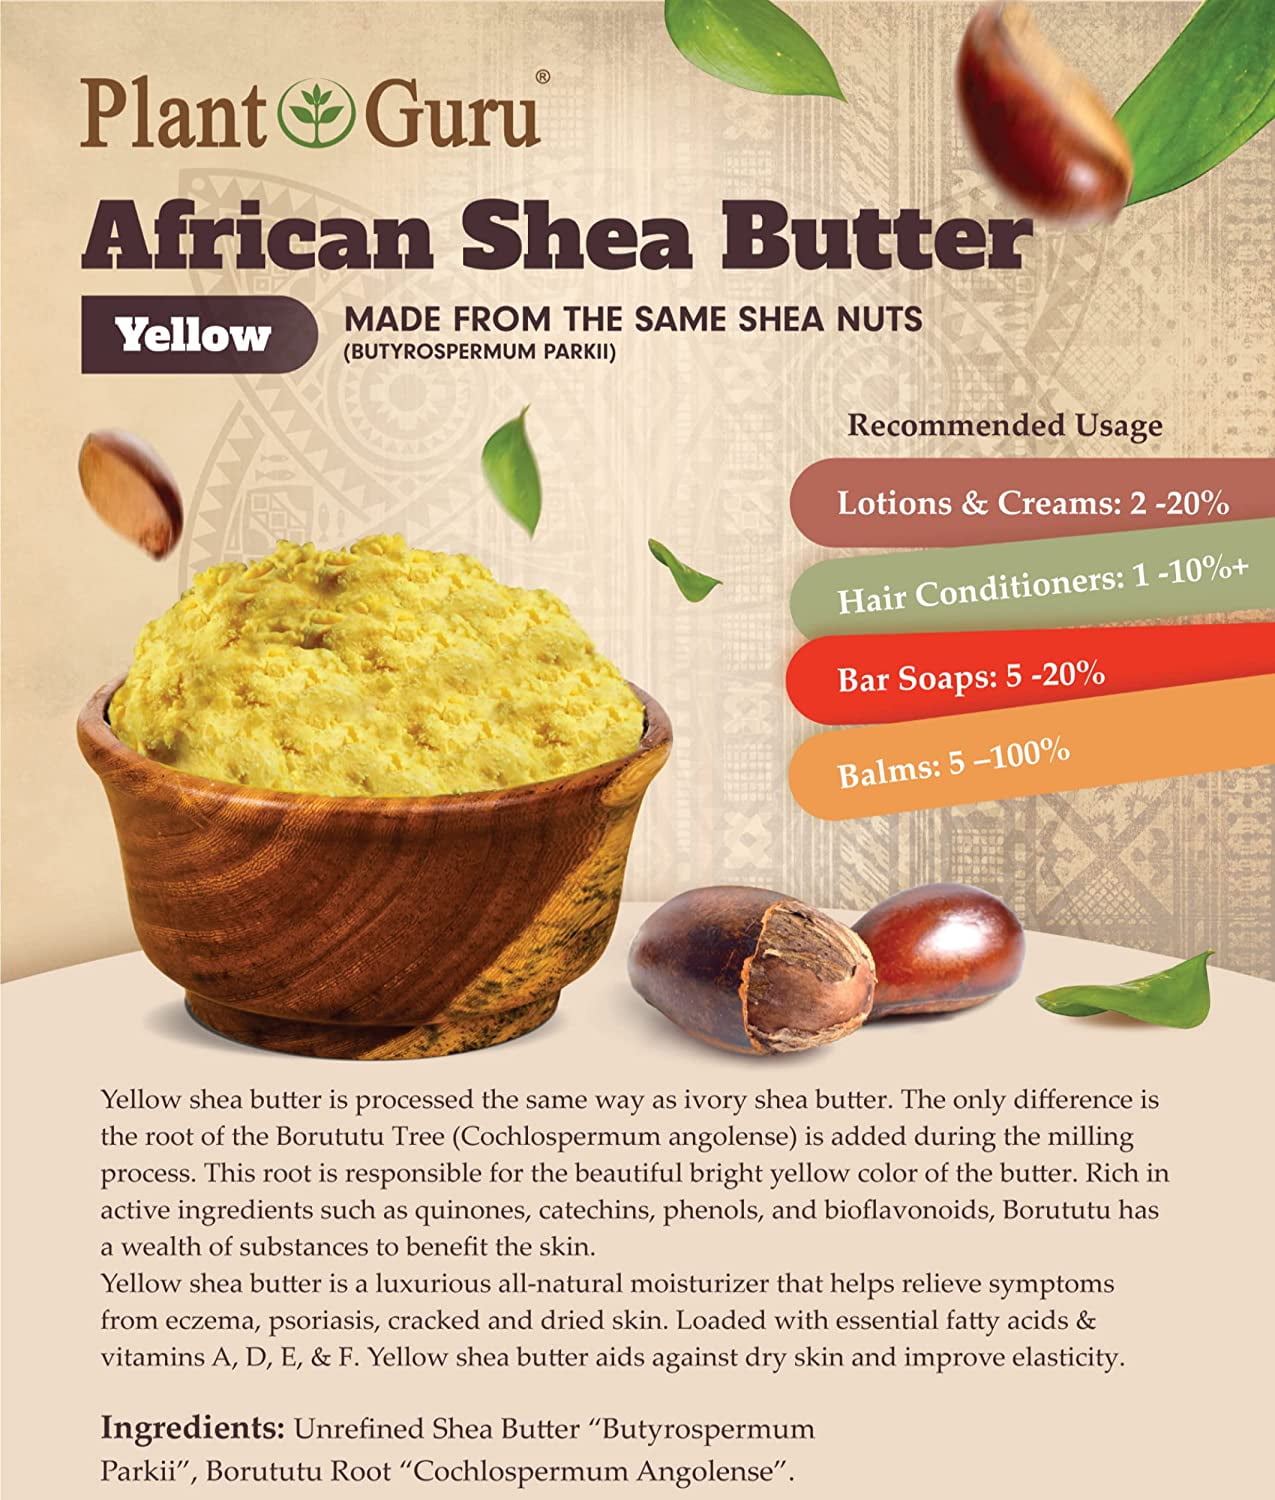 Raw African Shea Butter 5 lbs. Bulk Wholesale Block 100% Pure Natural Unrefined Organic Ivory / White from Ghana DIY Craft, Body, Lotion, Cream, Lip